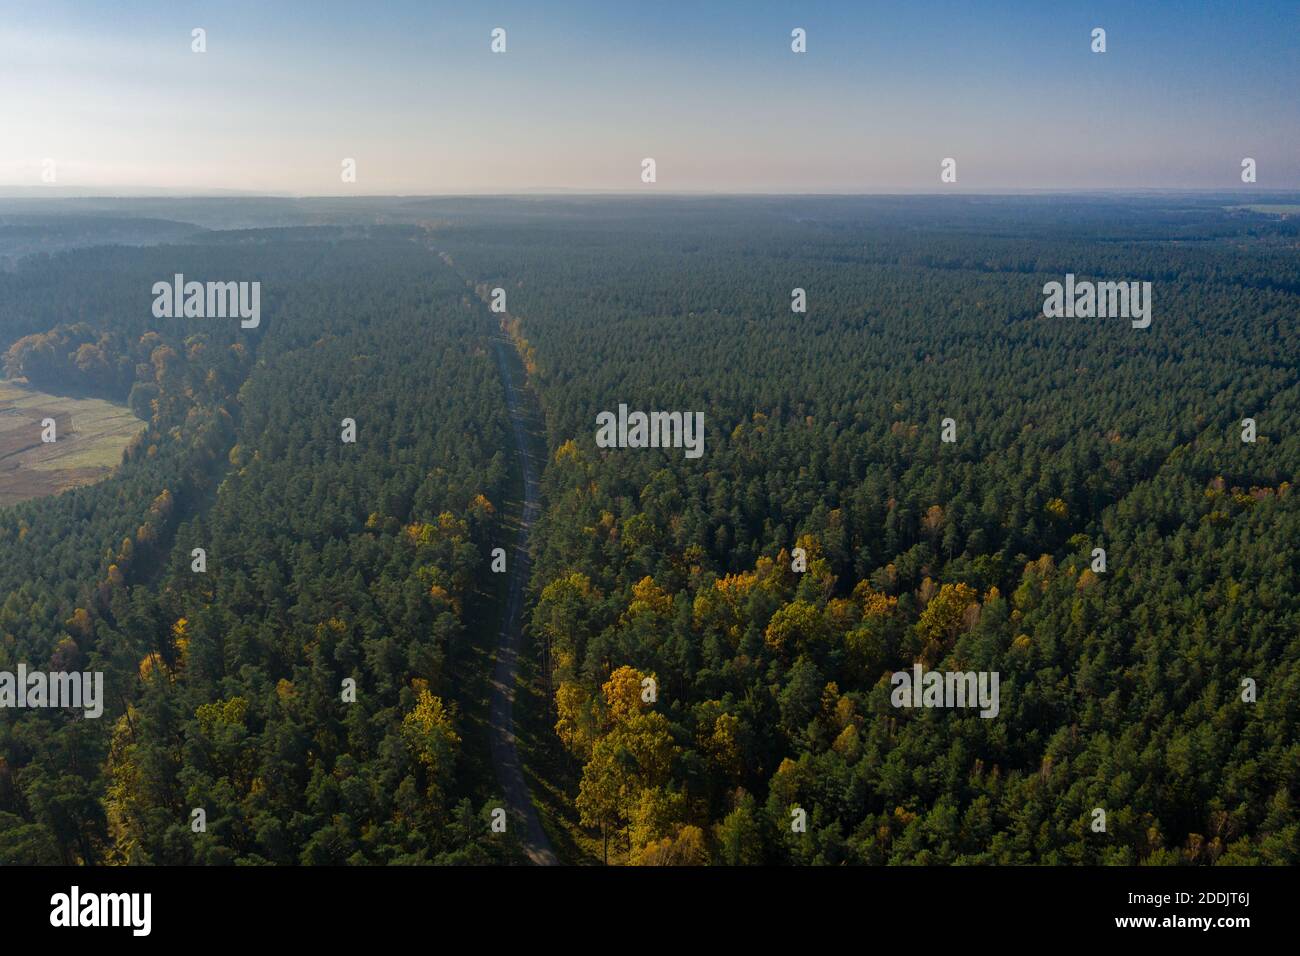 Aerial view of great pine forest and road amongst it Stock Photo